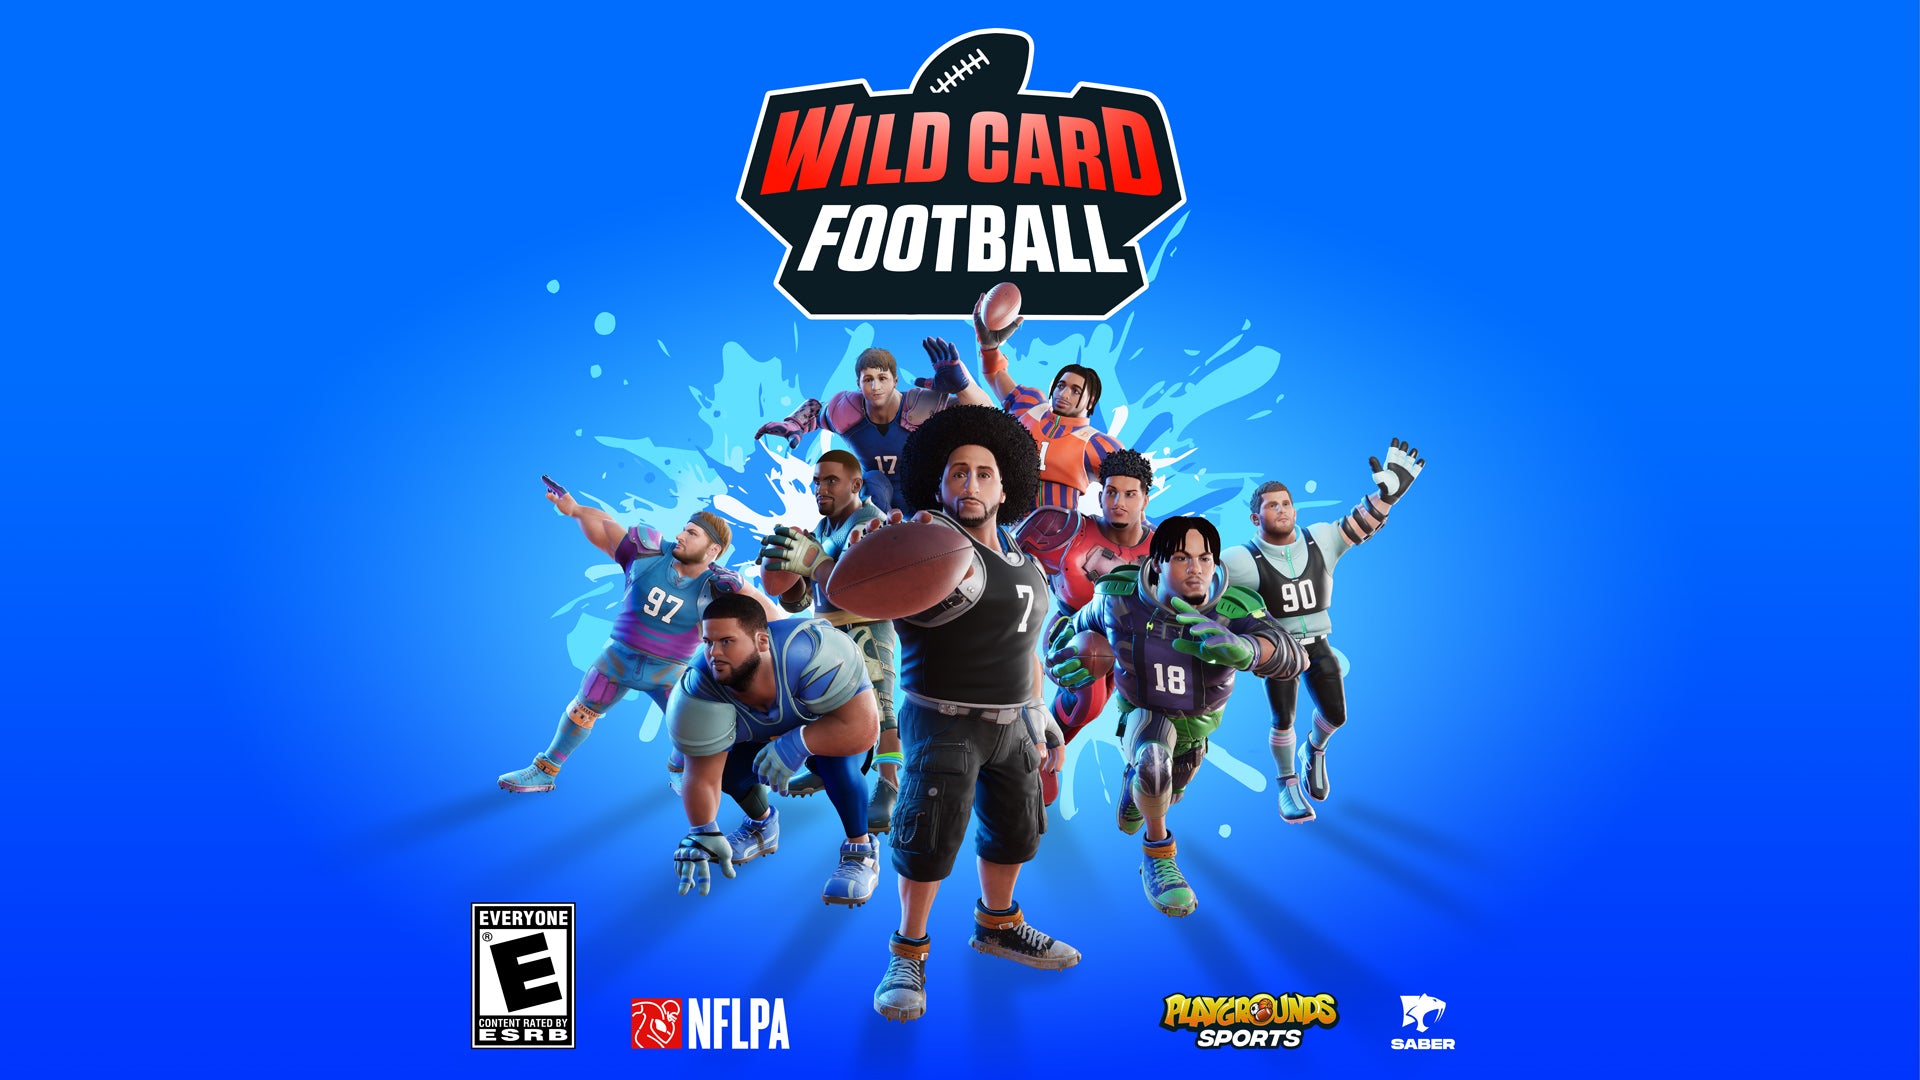 WILD CARD FOOTBALL KICKS OFF TODAY ON CONSOLES & PC